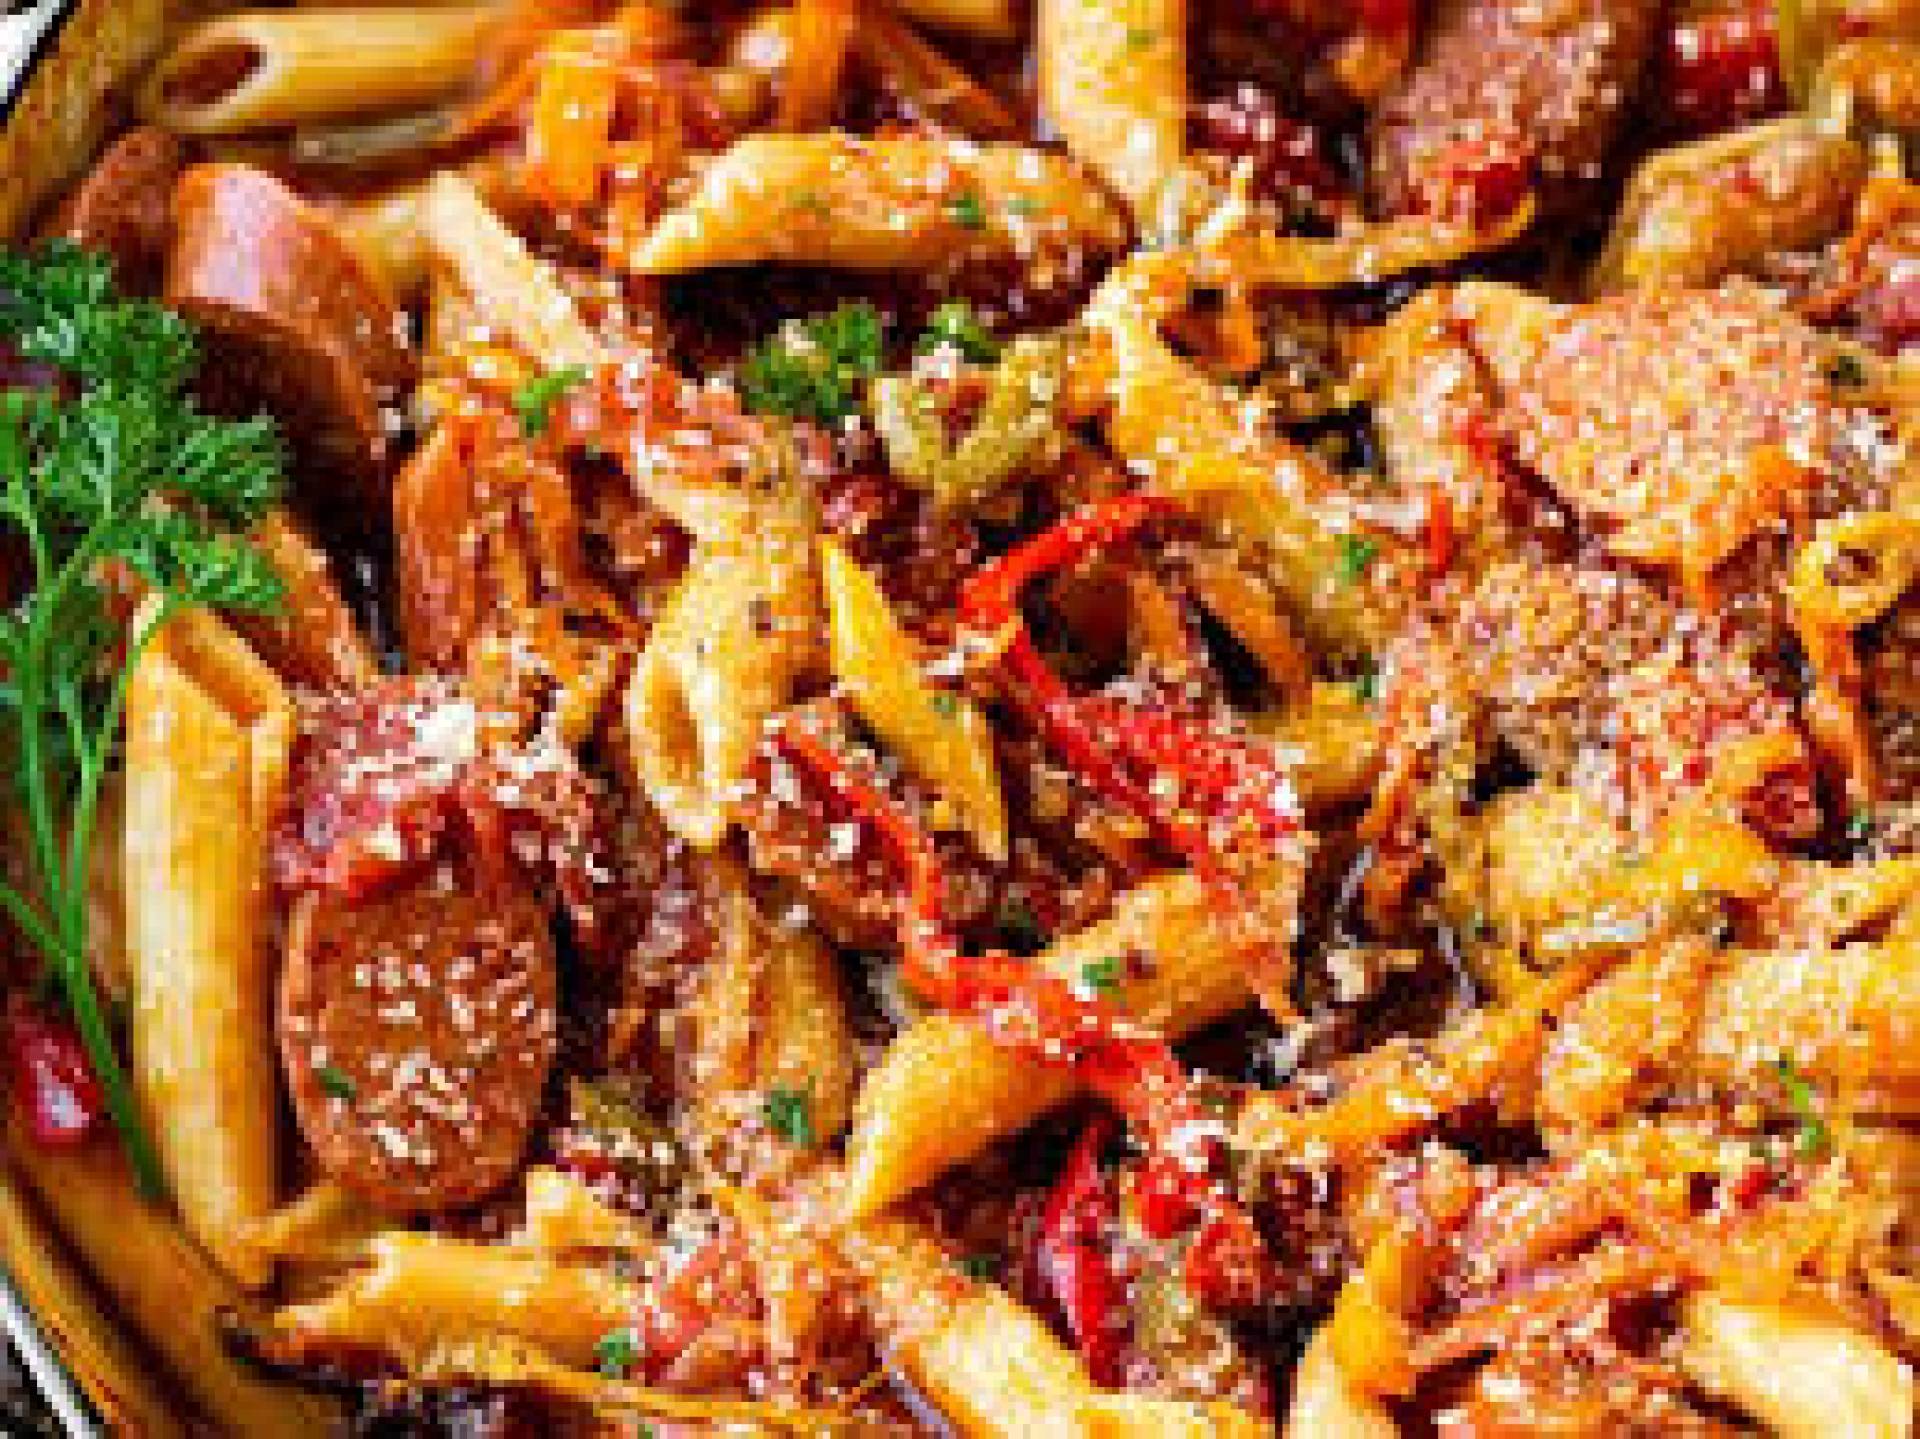 Cheesy Baked Ziti with Sweet Italian Sausage & Roasted Peppers.